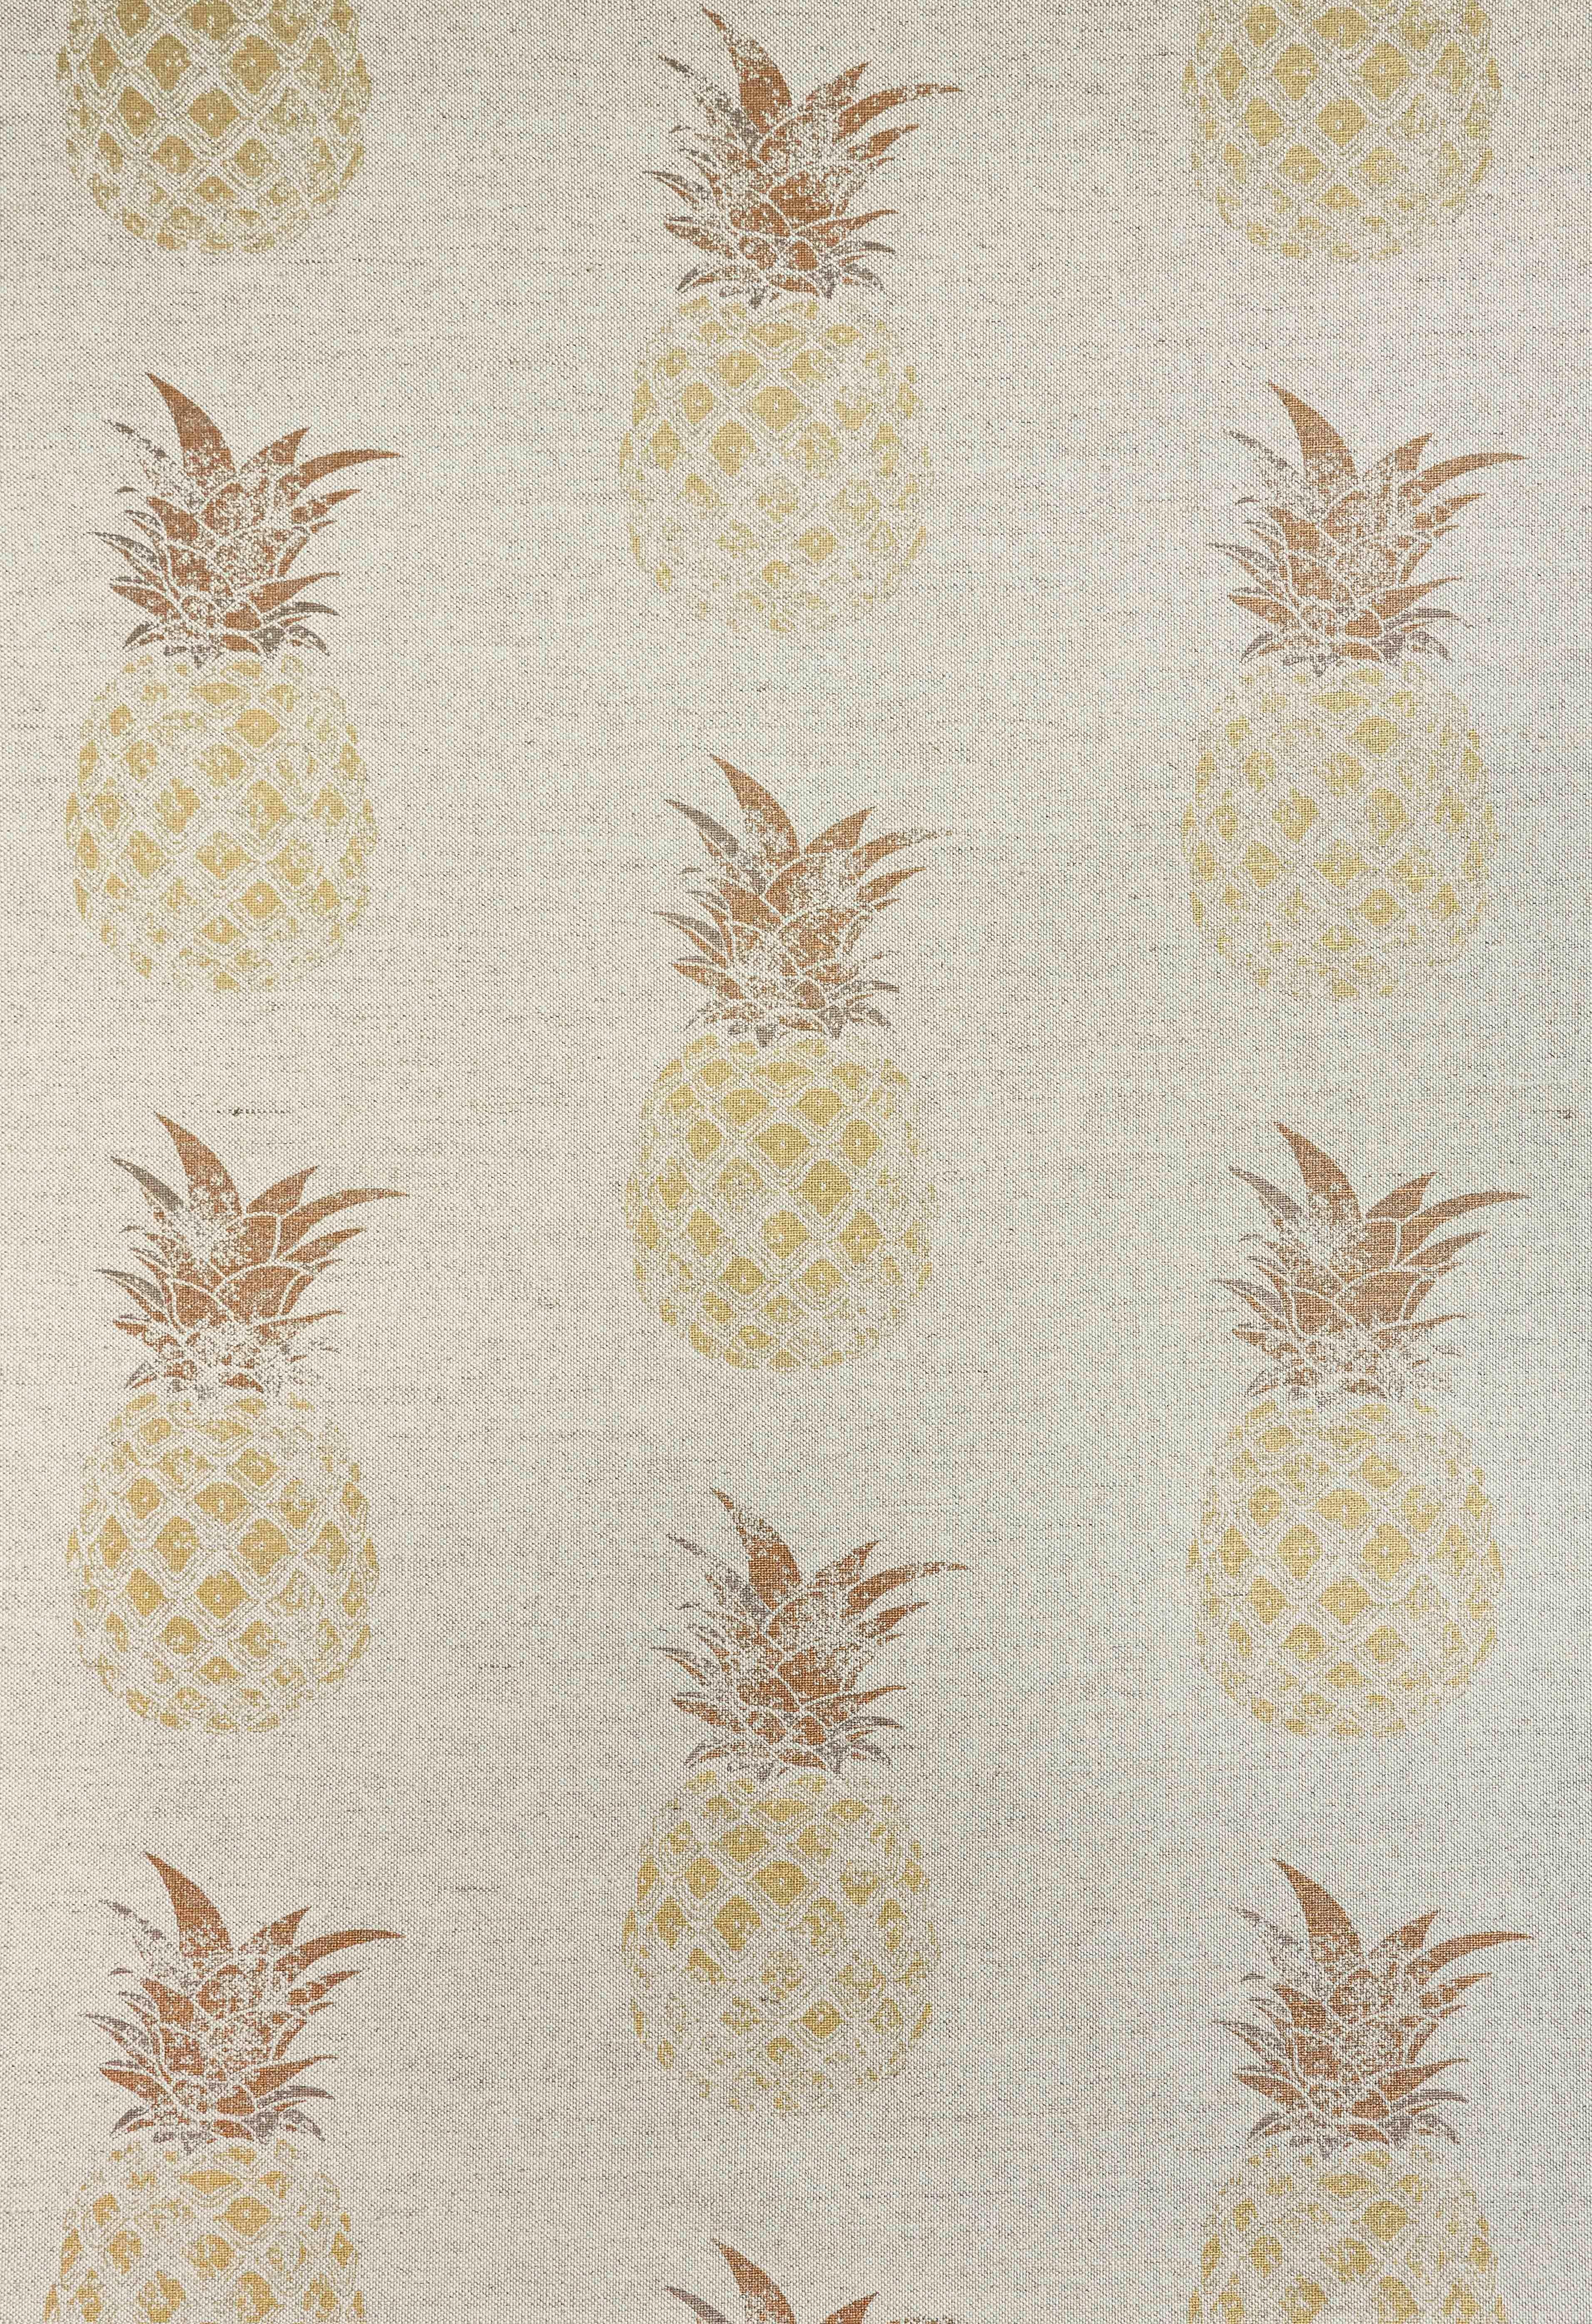 'Pineapple' Contemporary, Traditional Fabric in Gold on Charcoal In New Condition For Sale In Pewsey, Wiltshire